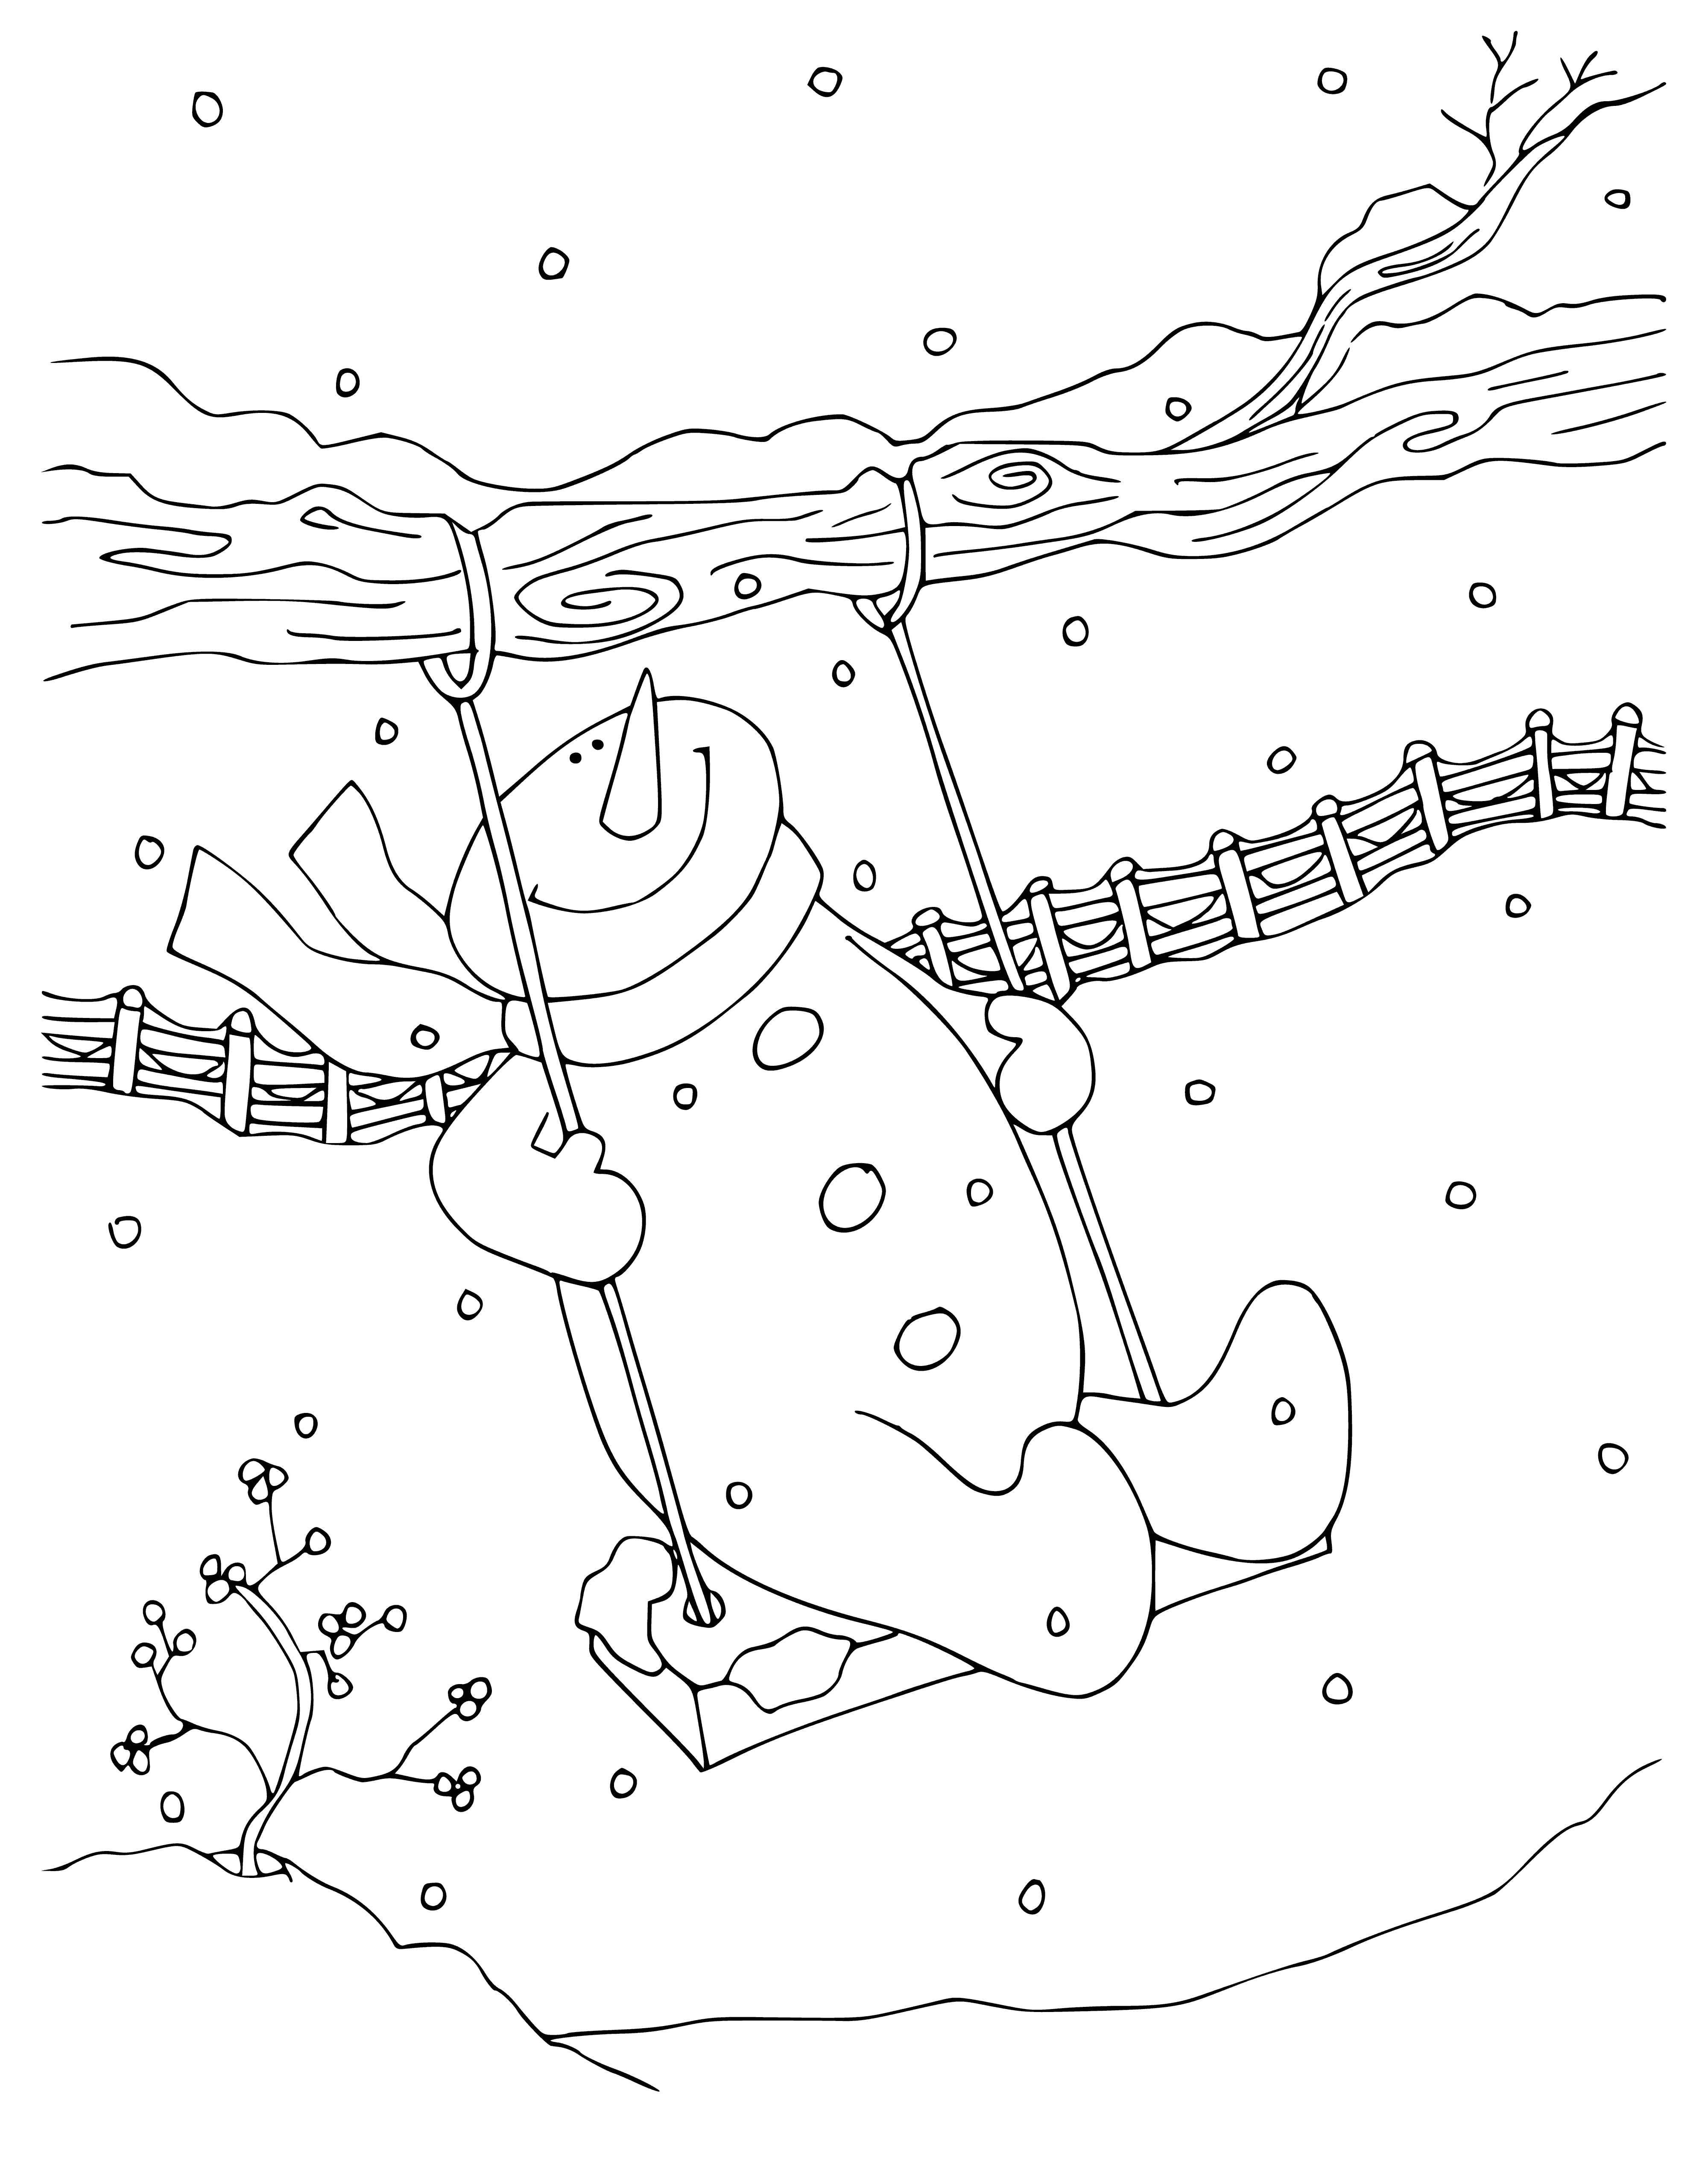 Sitting on a swing, a happy snowman stretches its arms with a hat tilted sideways.